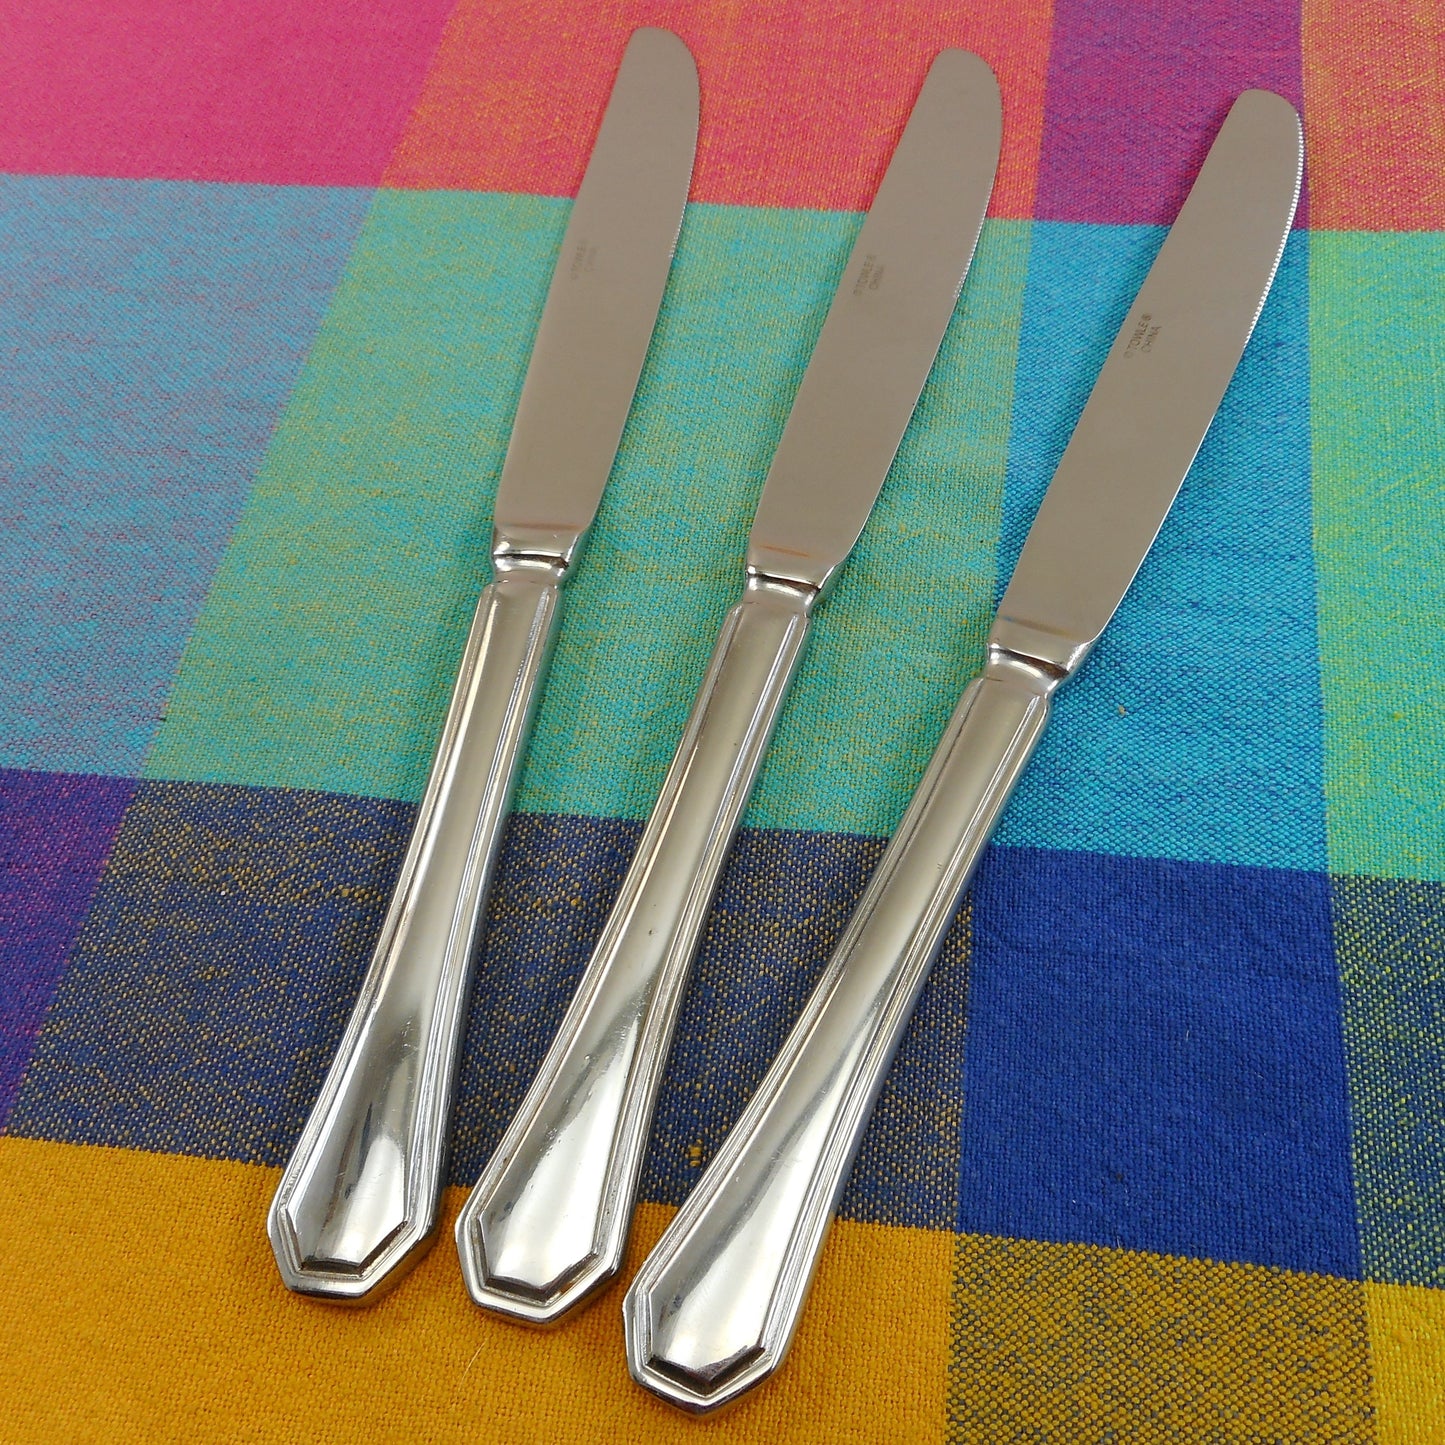 Towle 18-10 Stainless Flatware China TWS386 - 3 Dinner Knives 9-3/4"